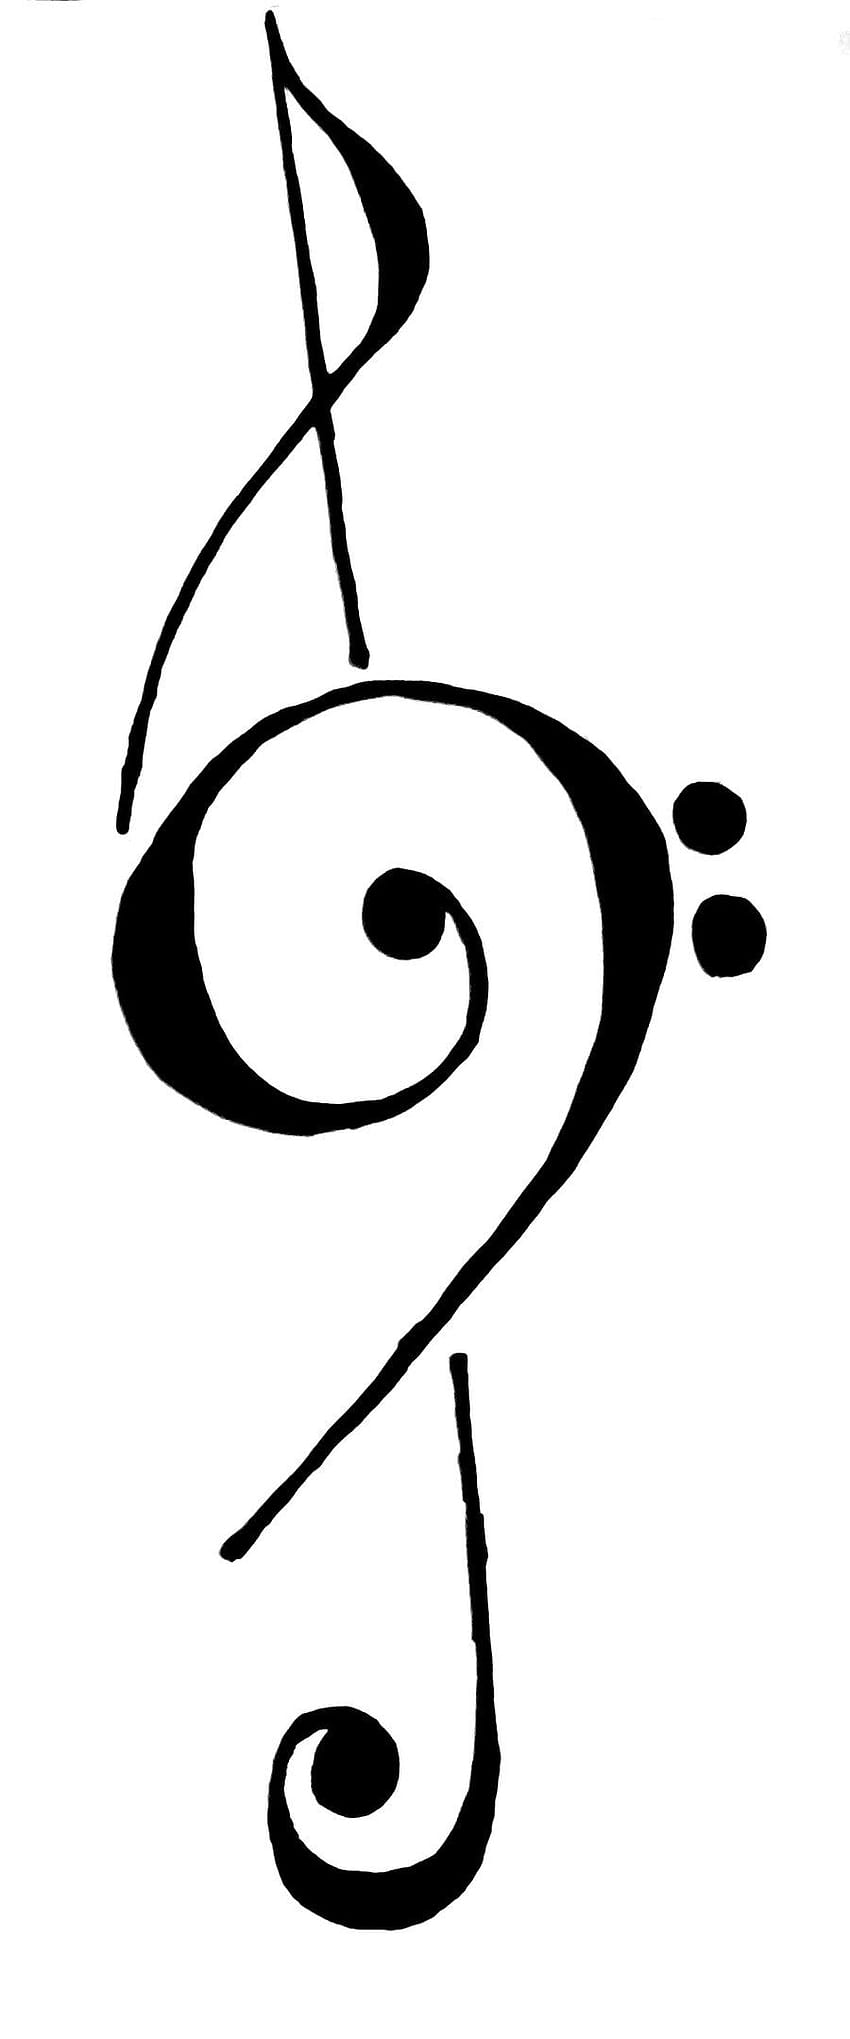 Designing a Quick Tribal Music Treble Clef Tattoo Design  YouTube